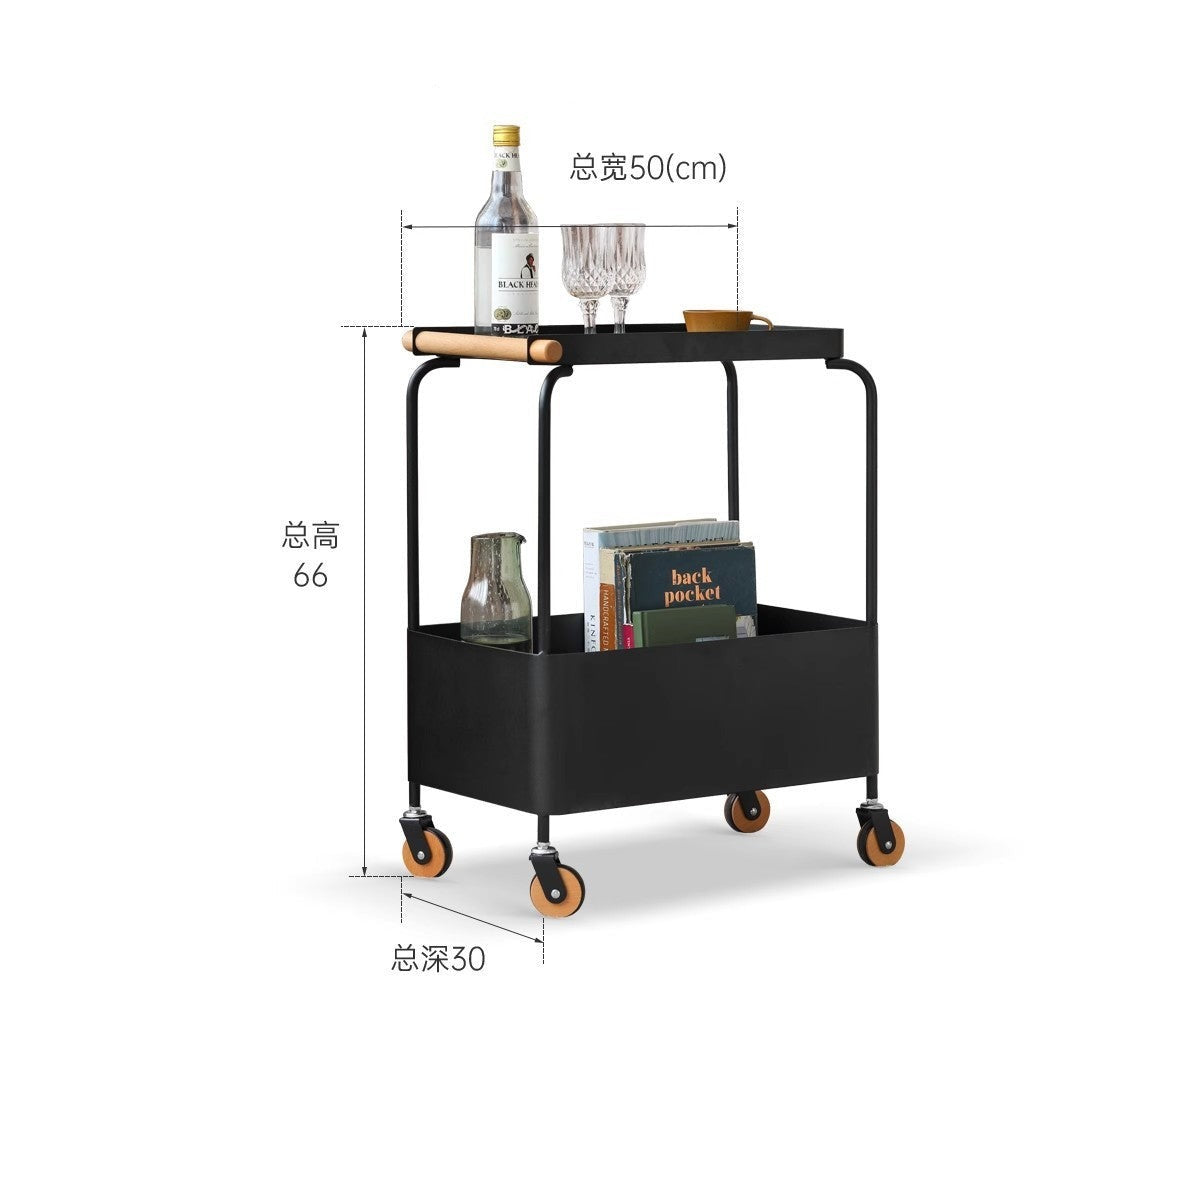 Storage rack, movable small cart"